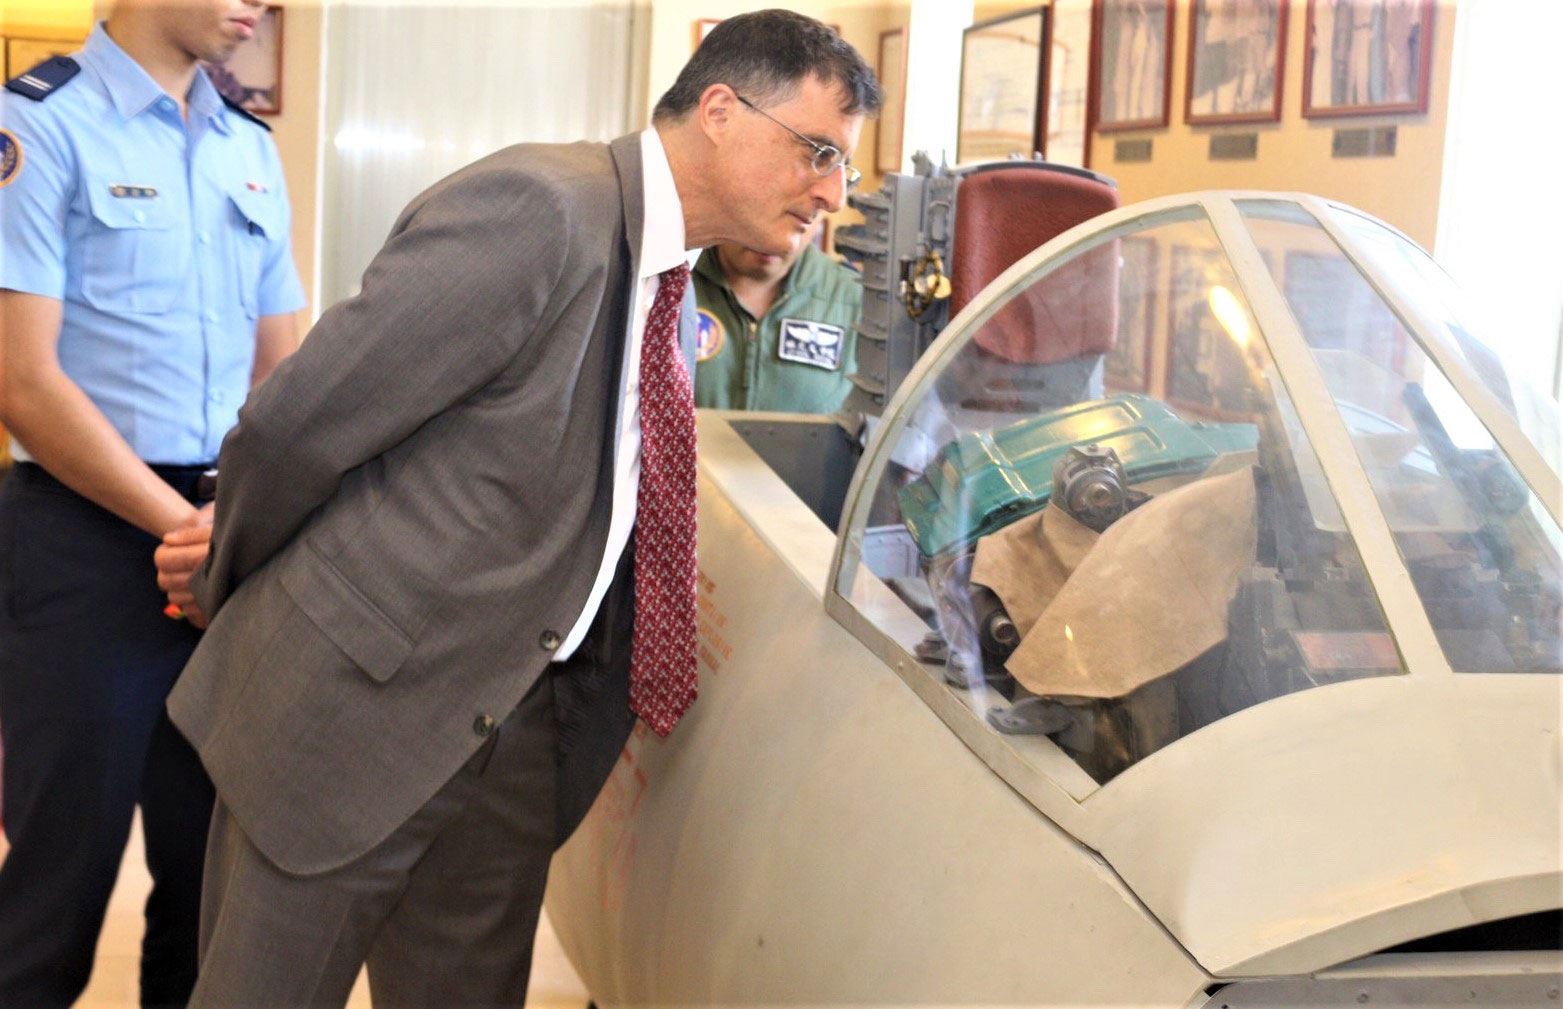 Eric Wakin looking into the cockpit of a plane on display at the American Footprint Museum